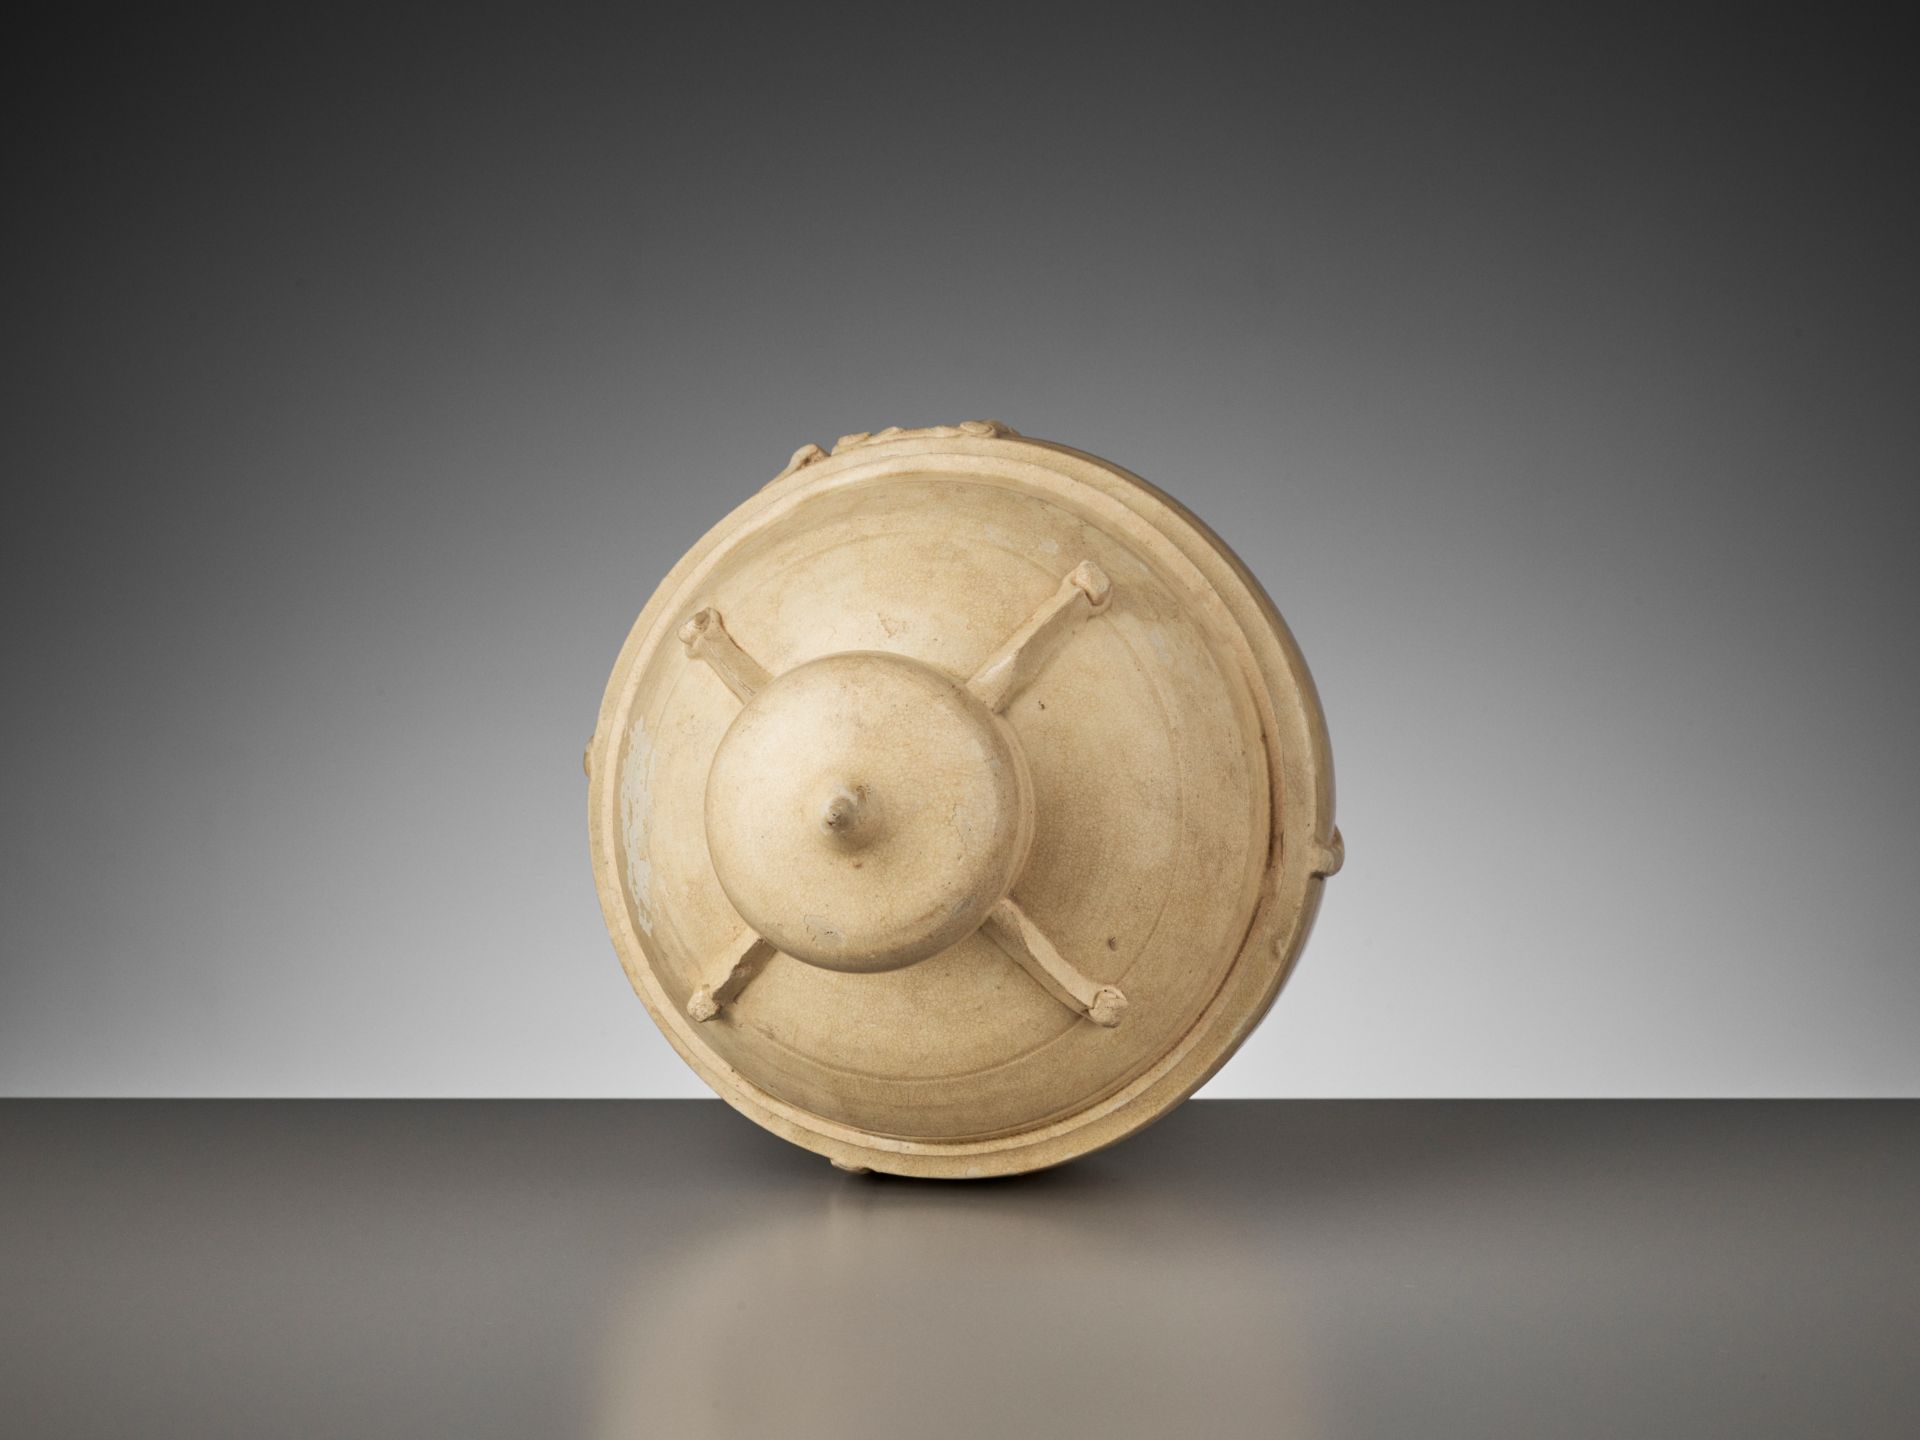 A RARE QINGBAI 'GRANARY' VESSEL, SOUTHERN SONG TO YUAN DYNASTY - Image 7 of 8